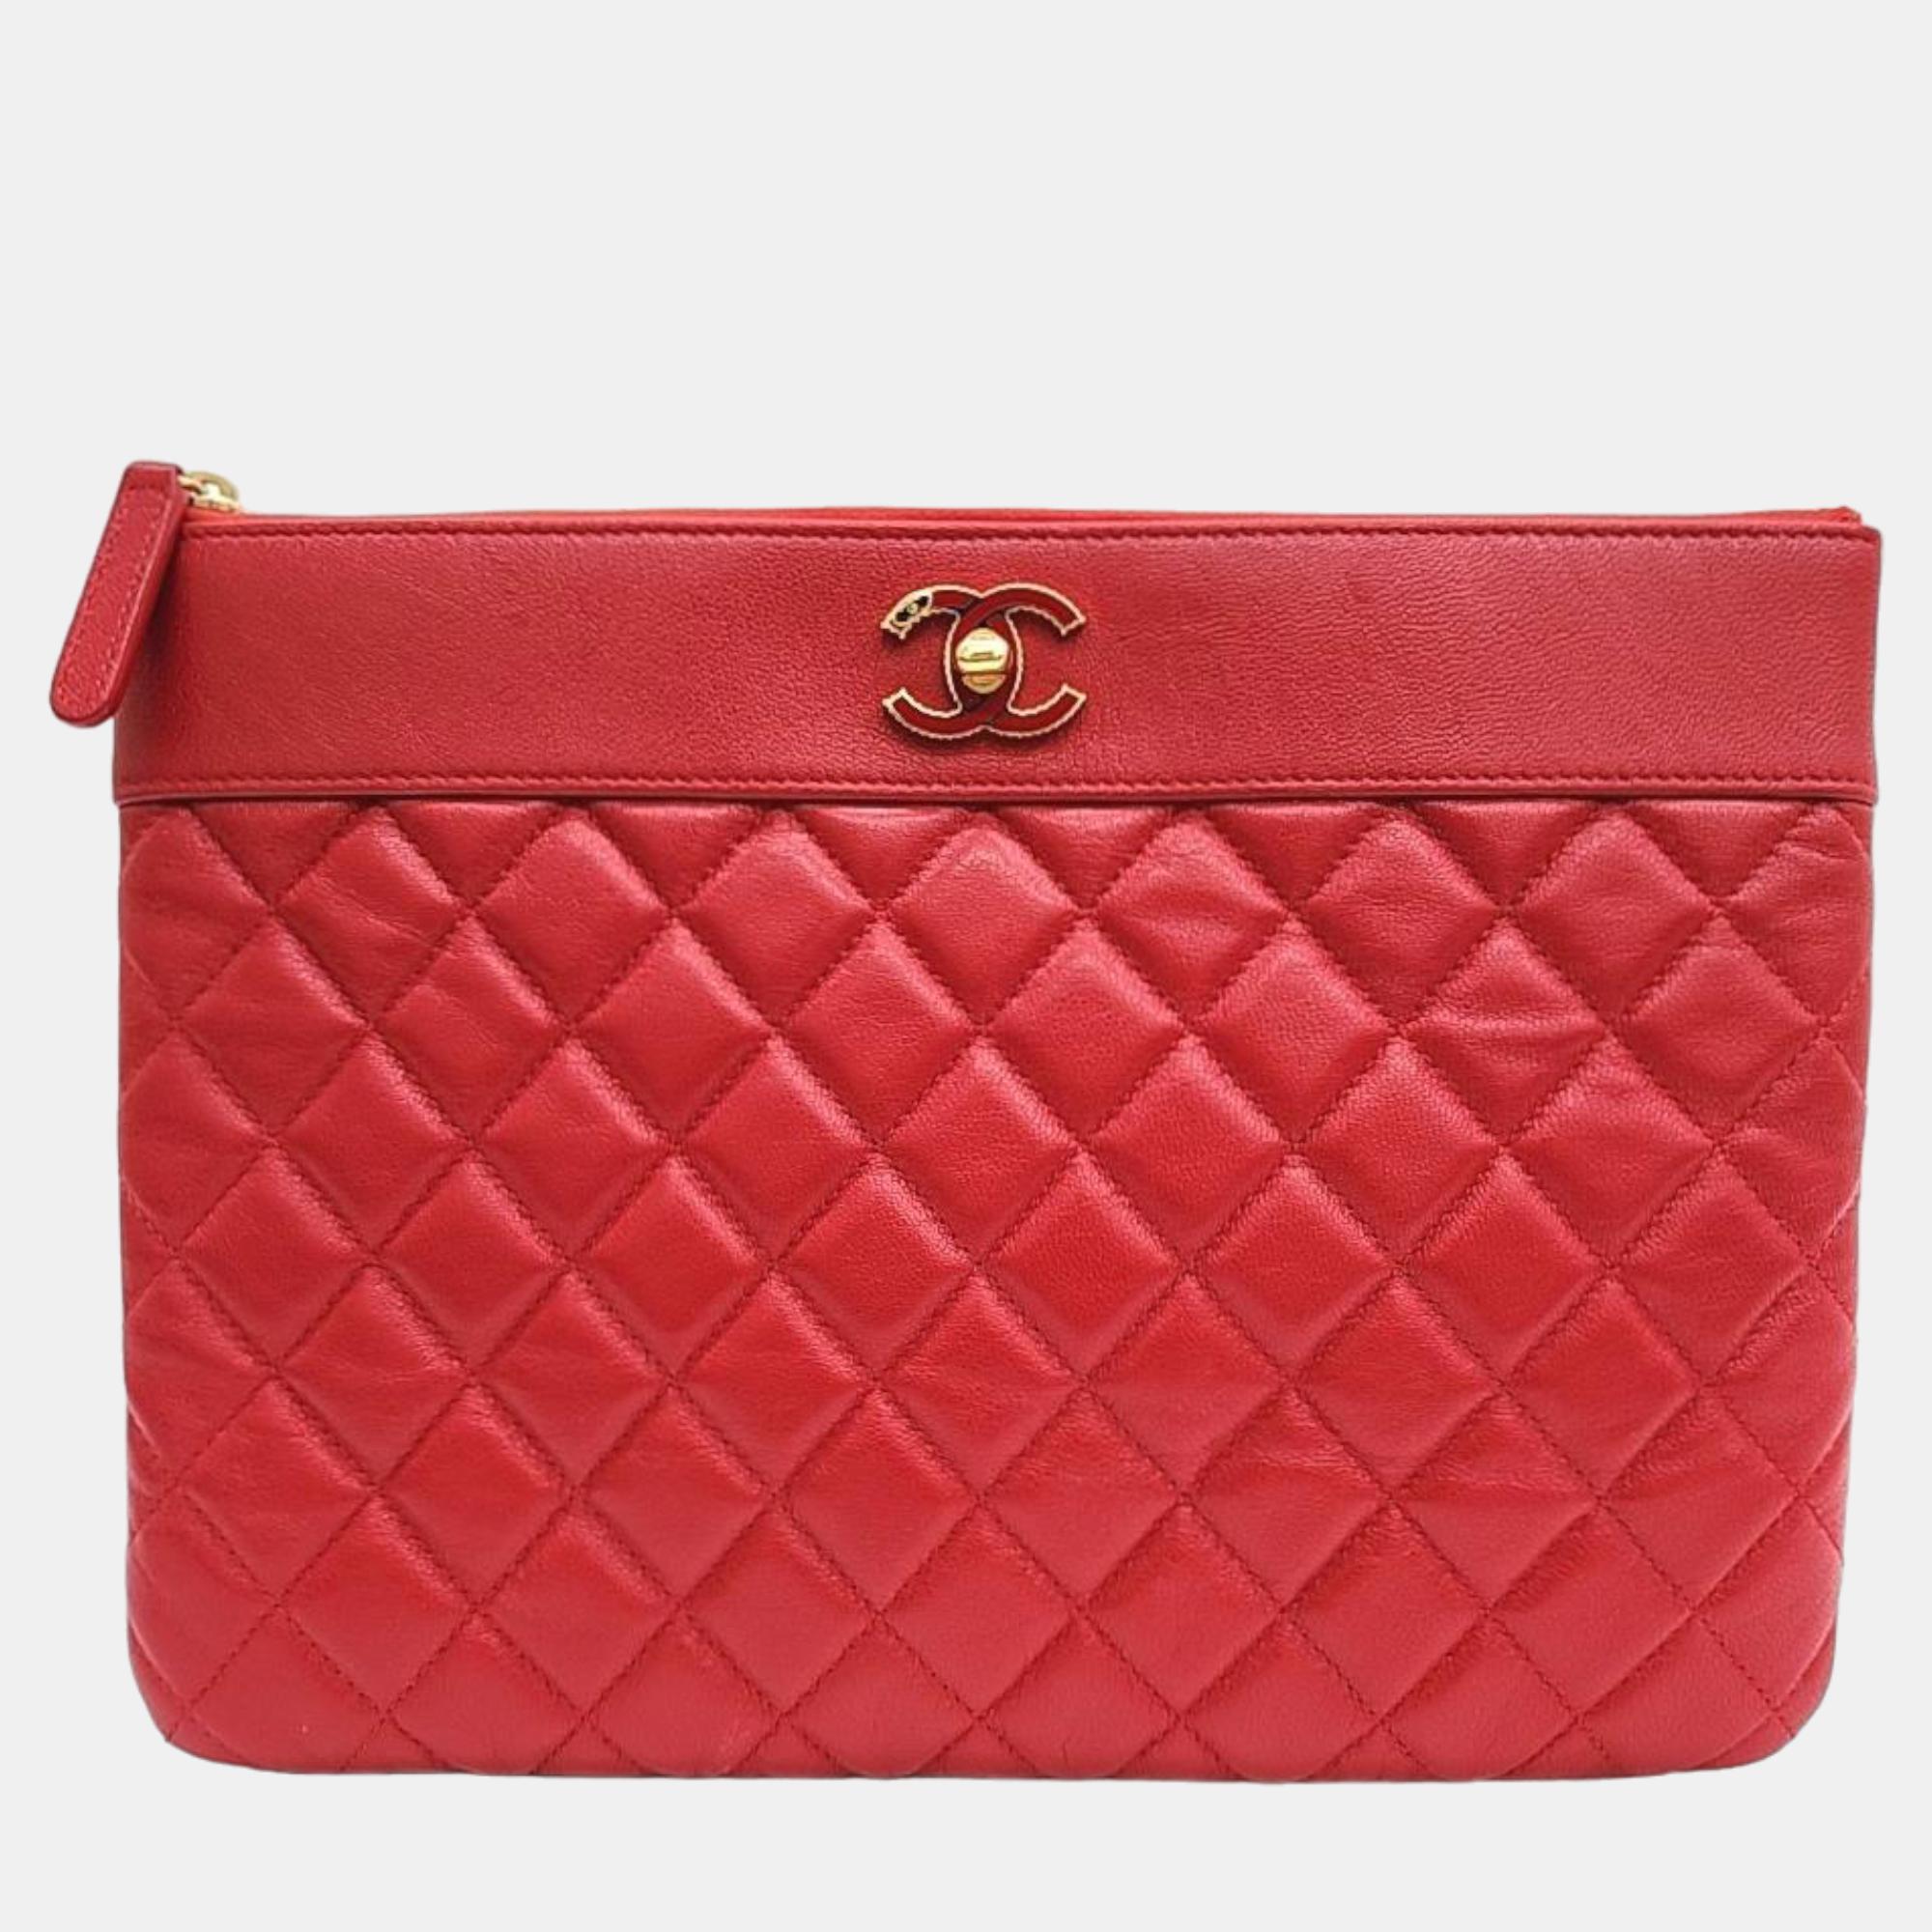 Chanel Red Leather Mademoiselle Clutch